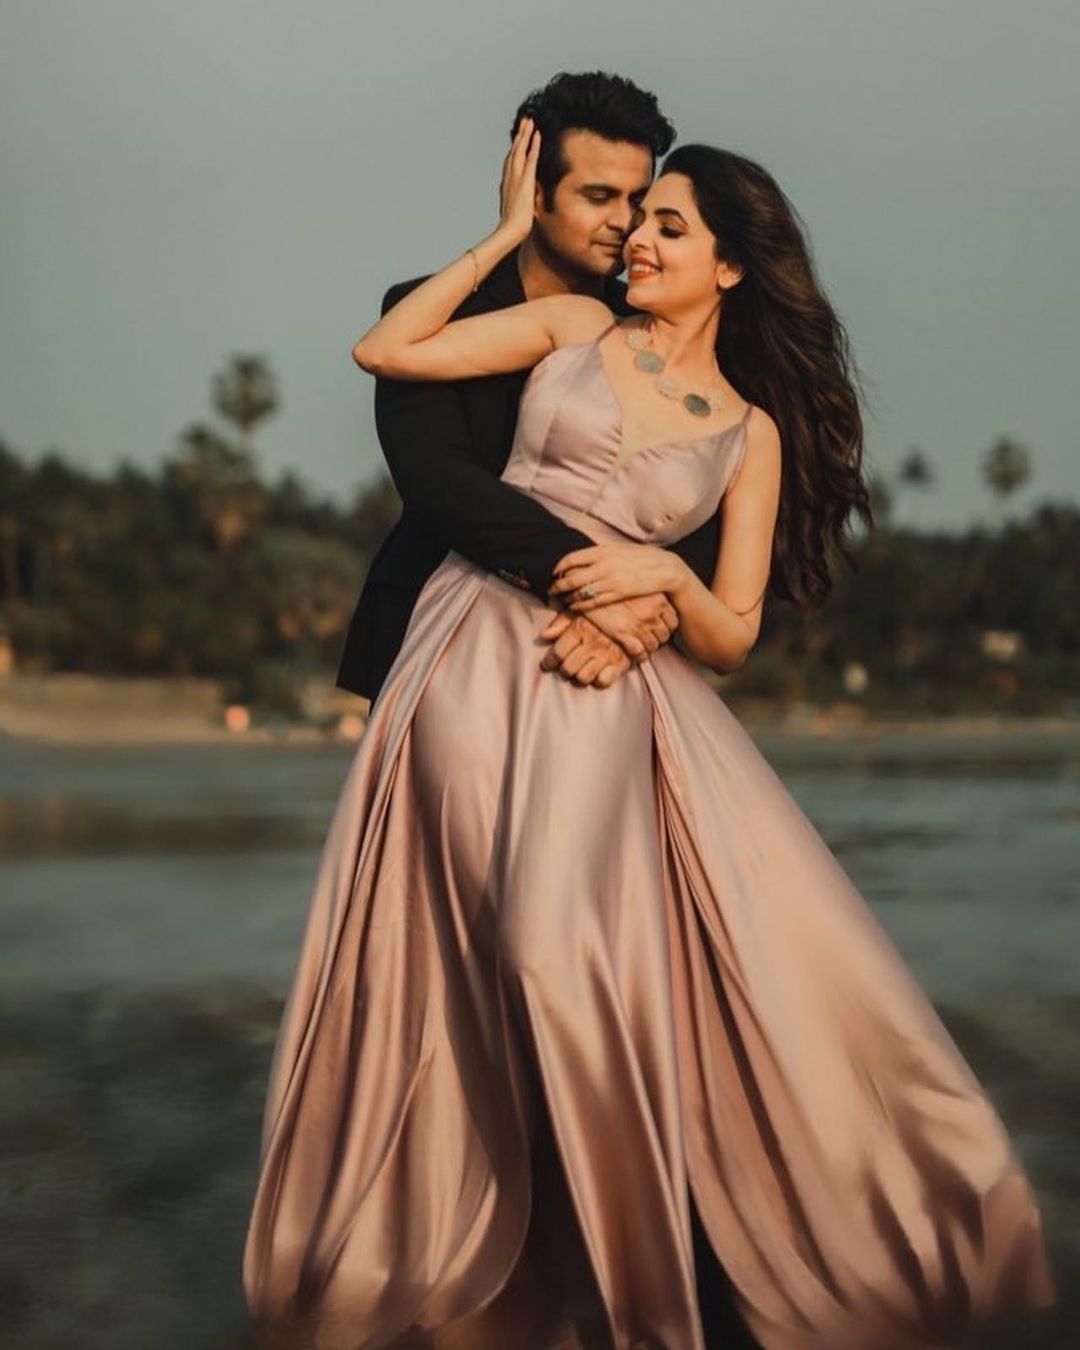 Sugandha Mishra Shares Unseen Pics With Hubby Sanket Bhosale From Wedding  Ceremony; Couple Looks Mesmerising As They Take Saath Pheras